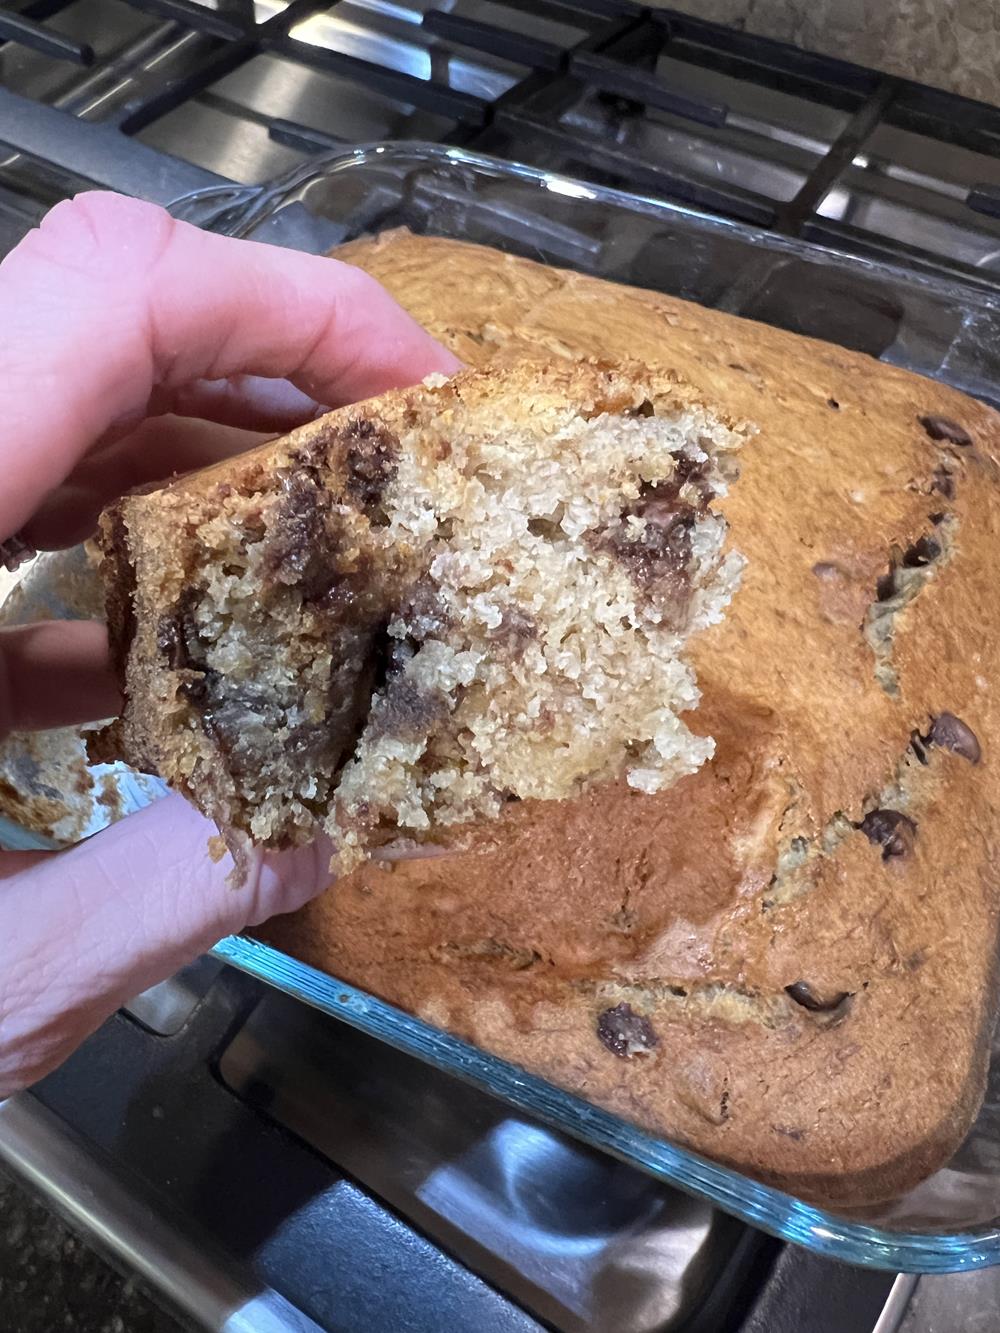 banana bread baked in cake pan with hand holding piece of bread